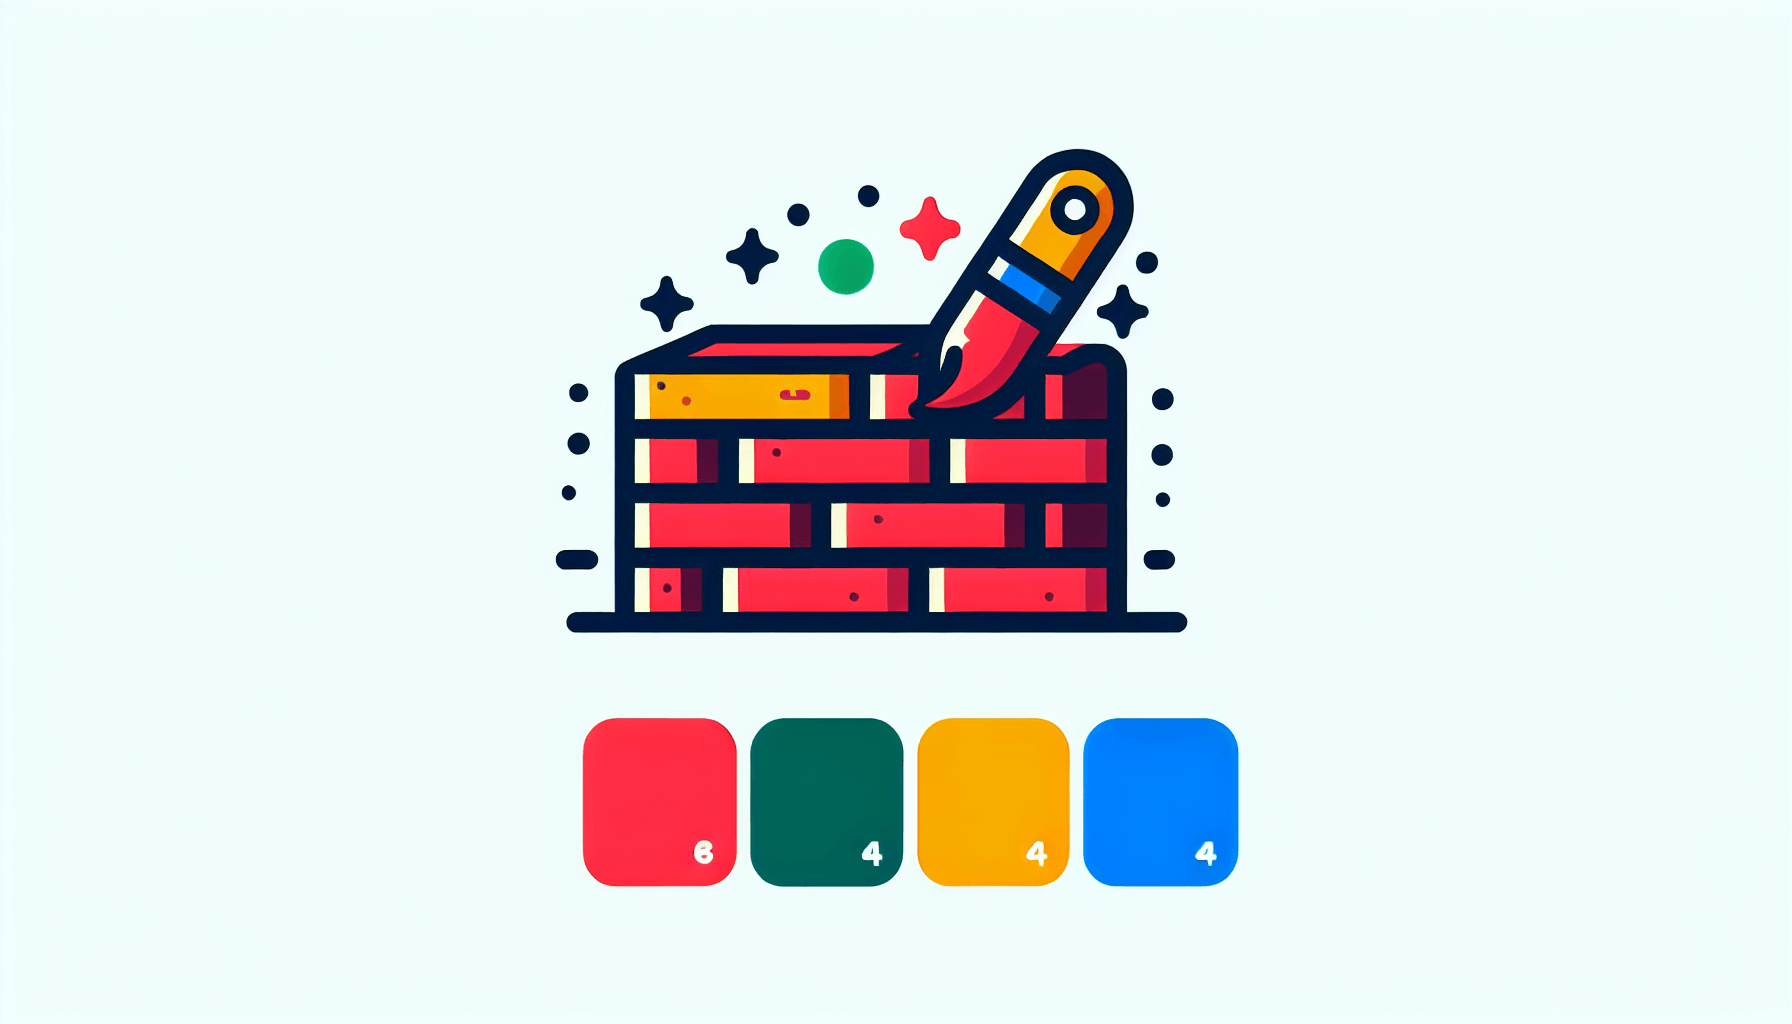 Brick in flat illustration style and white background, red #f47574, green #88c7a8, yellow #fcc44b, and blue #645bc8 colors.